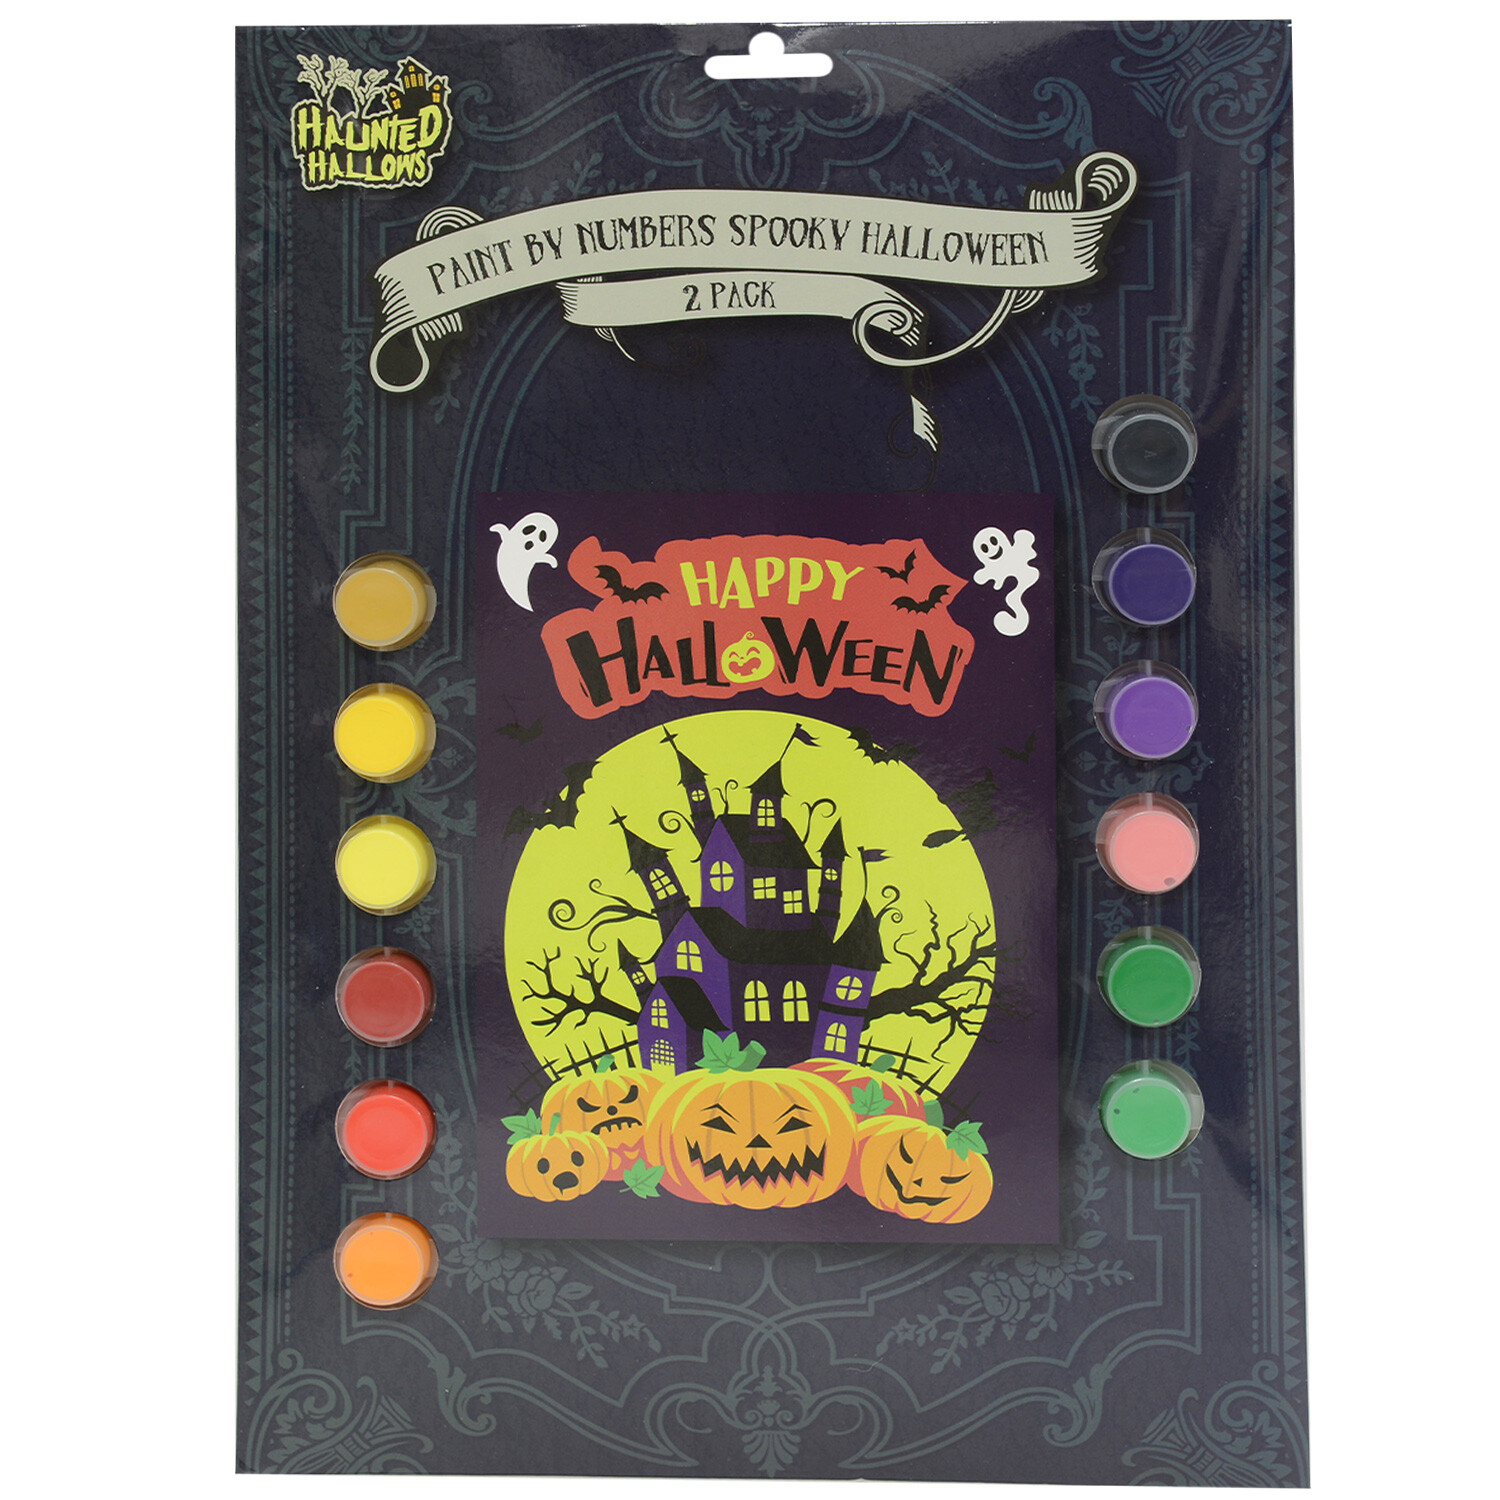 Haunted Hallows Paint Your Own Spooky Halloween Canvas Kit Image 1